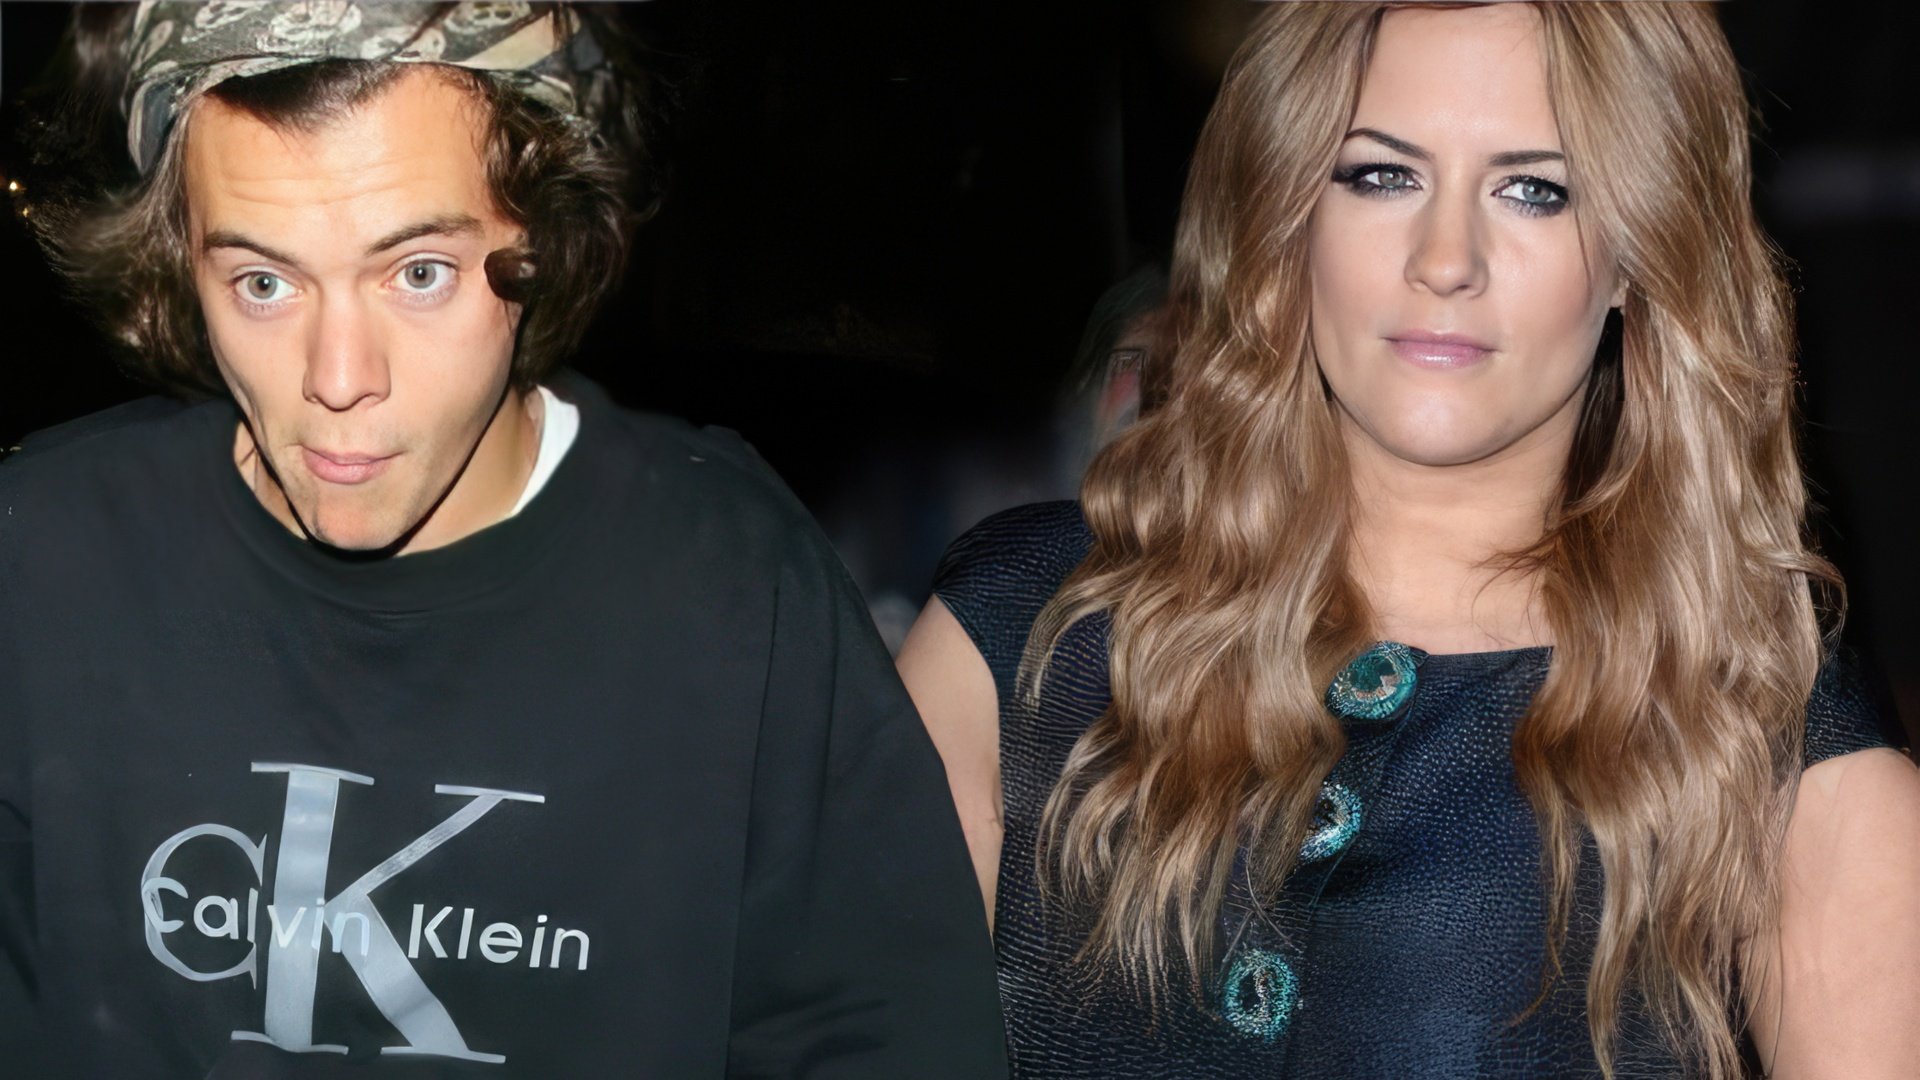 Harry Styles and Caroline Flack had a 15-year age difference